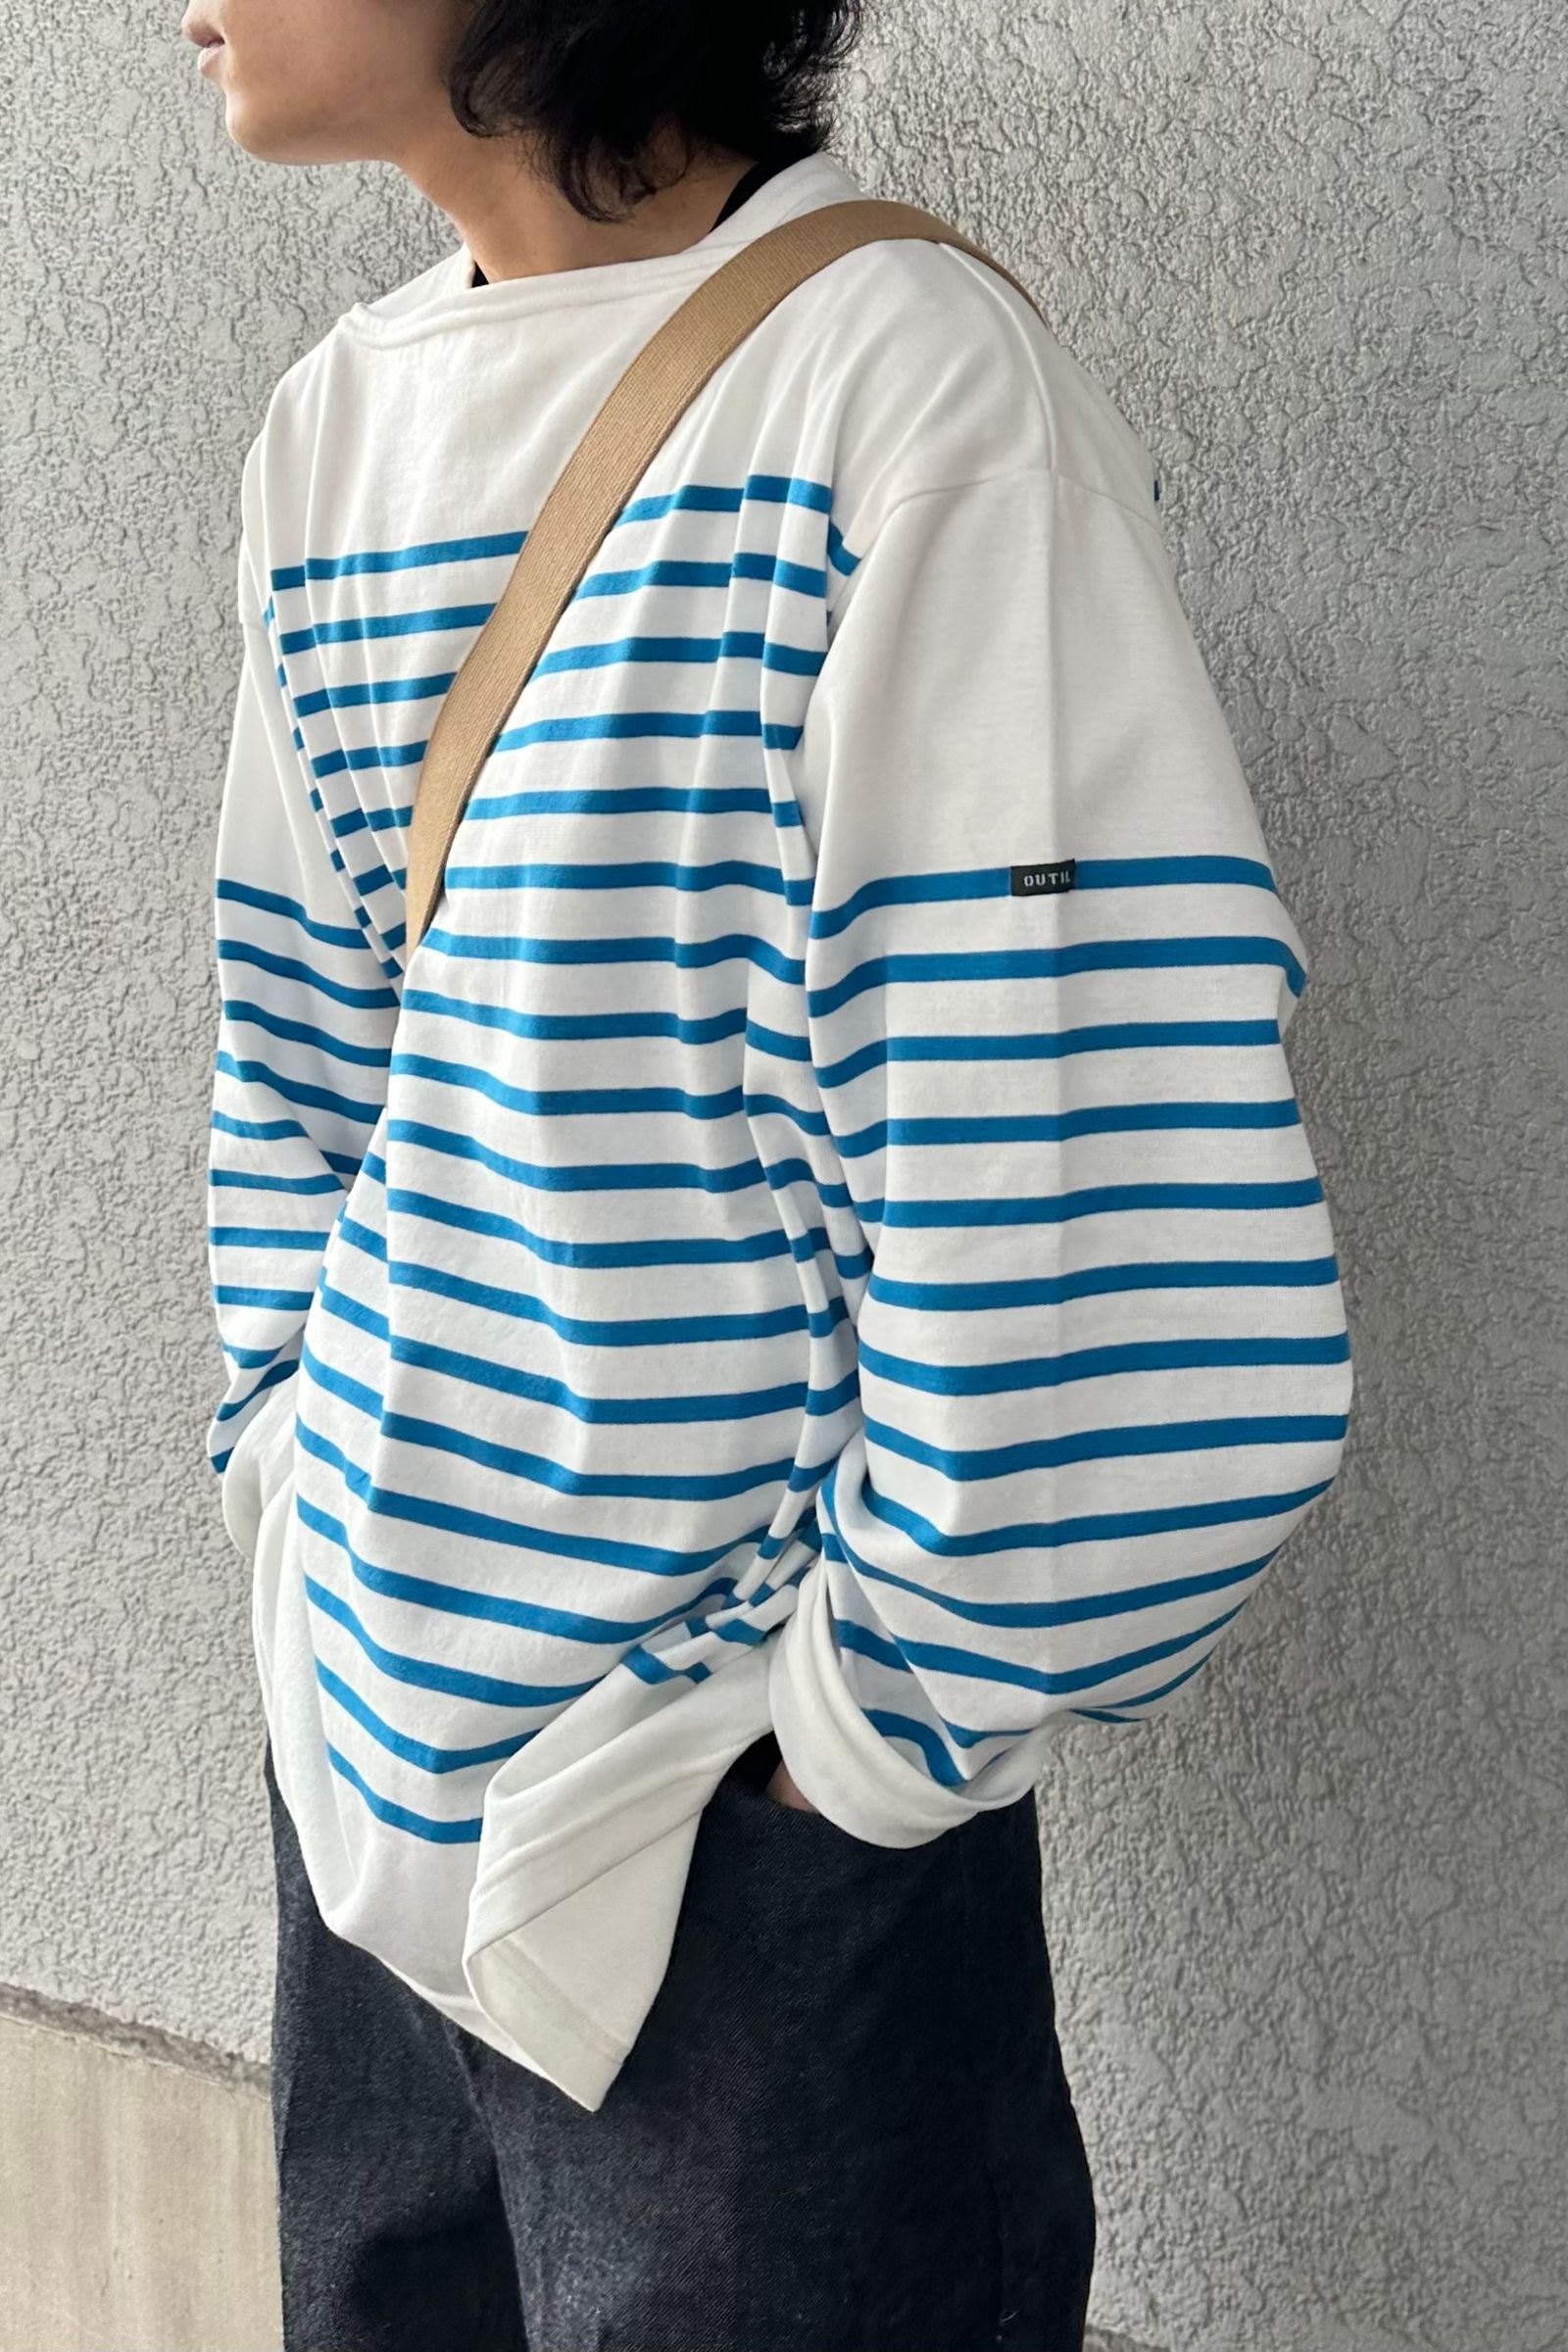 OUTIL - バスクシャツ/tricot aast -OFF/INDIGO BUNTING- 24ss ...